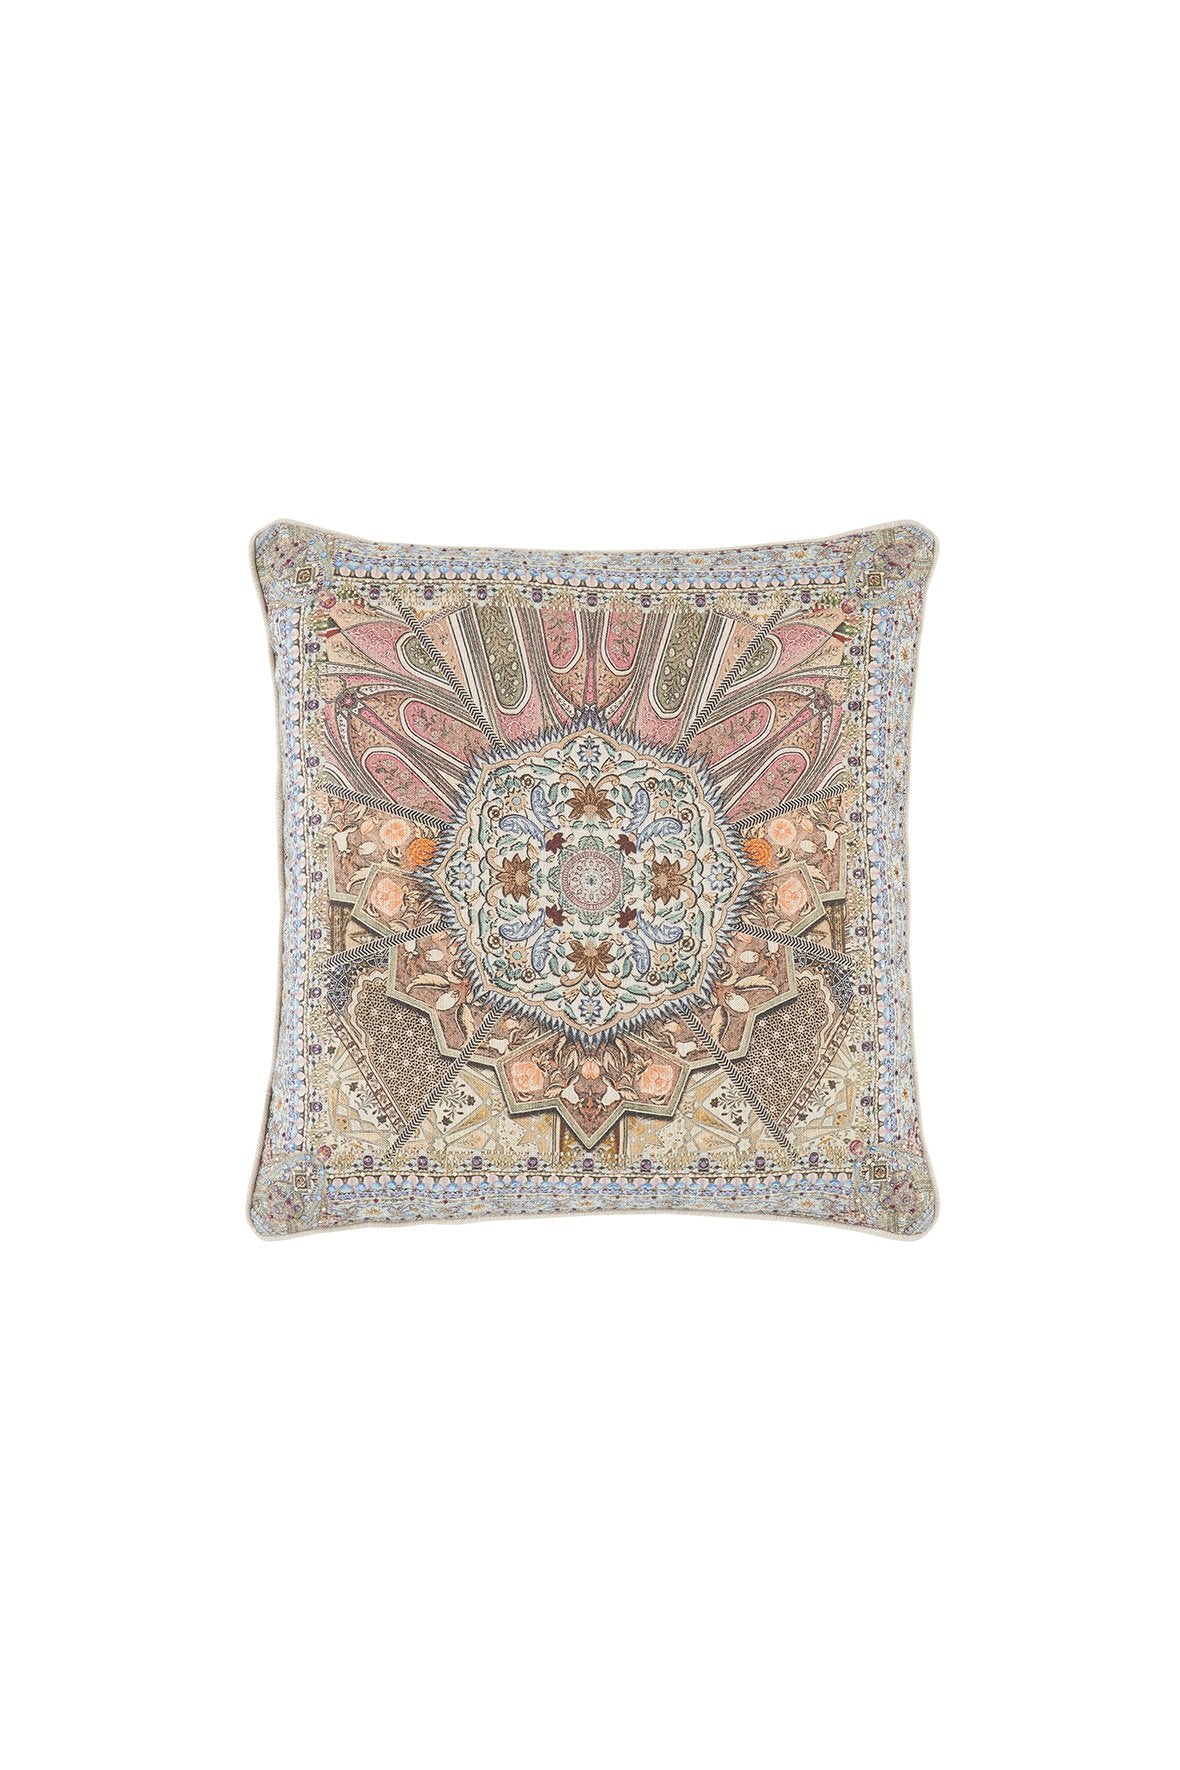 SOUL SISTERS SMALL SQUARE CUSHION